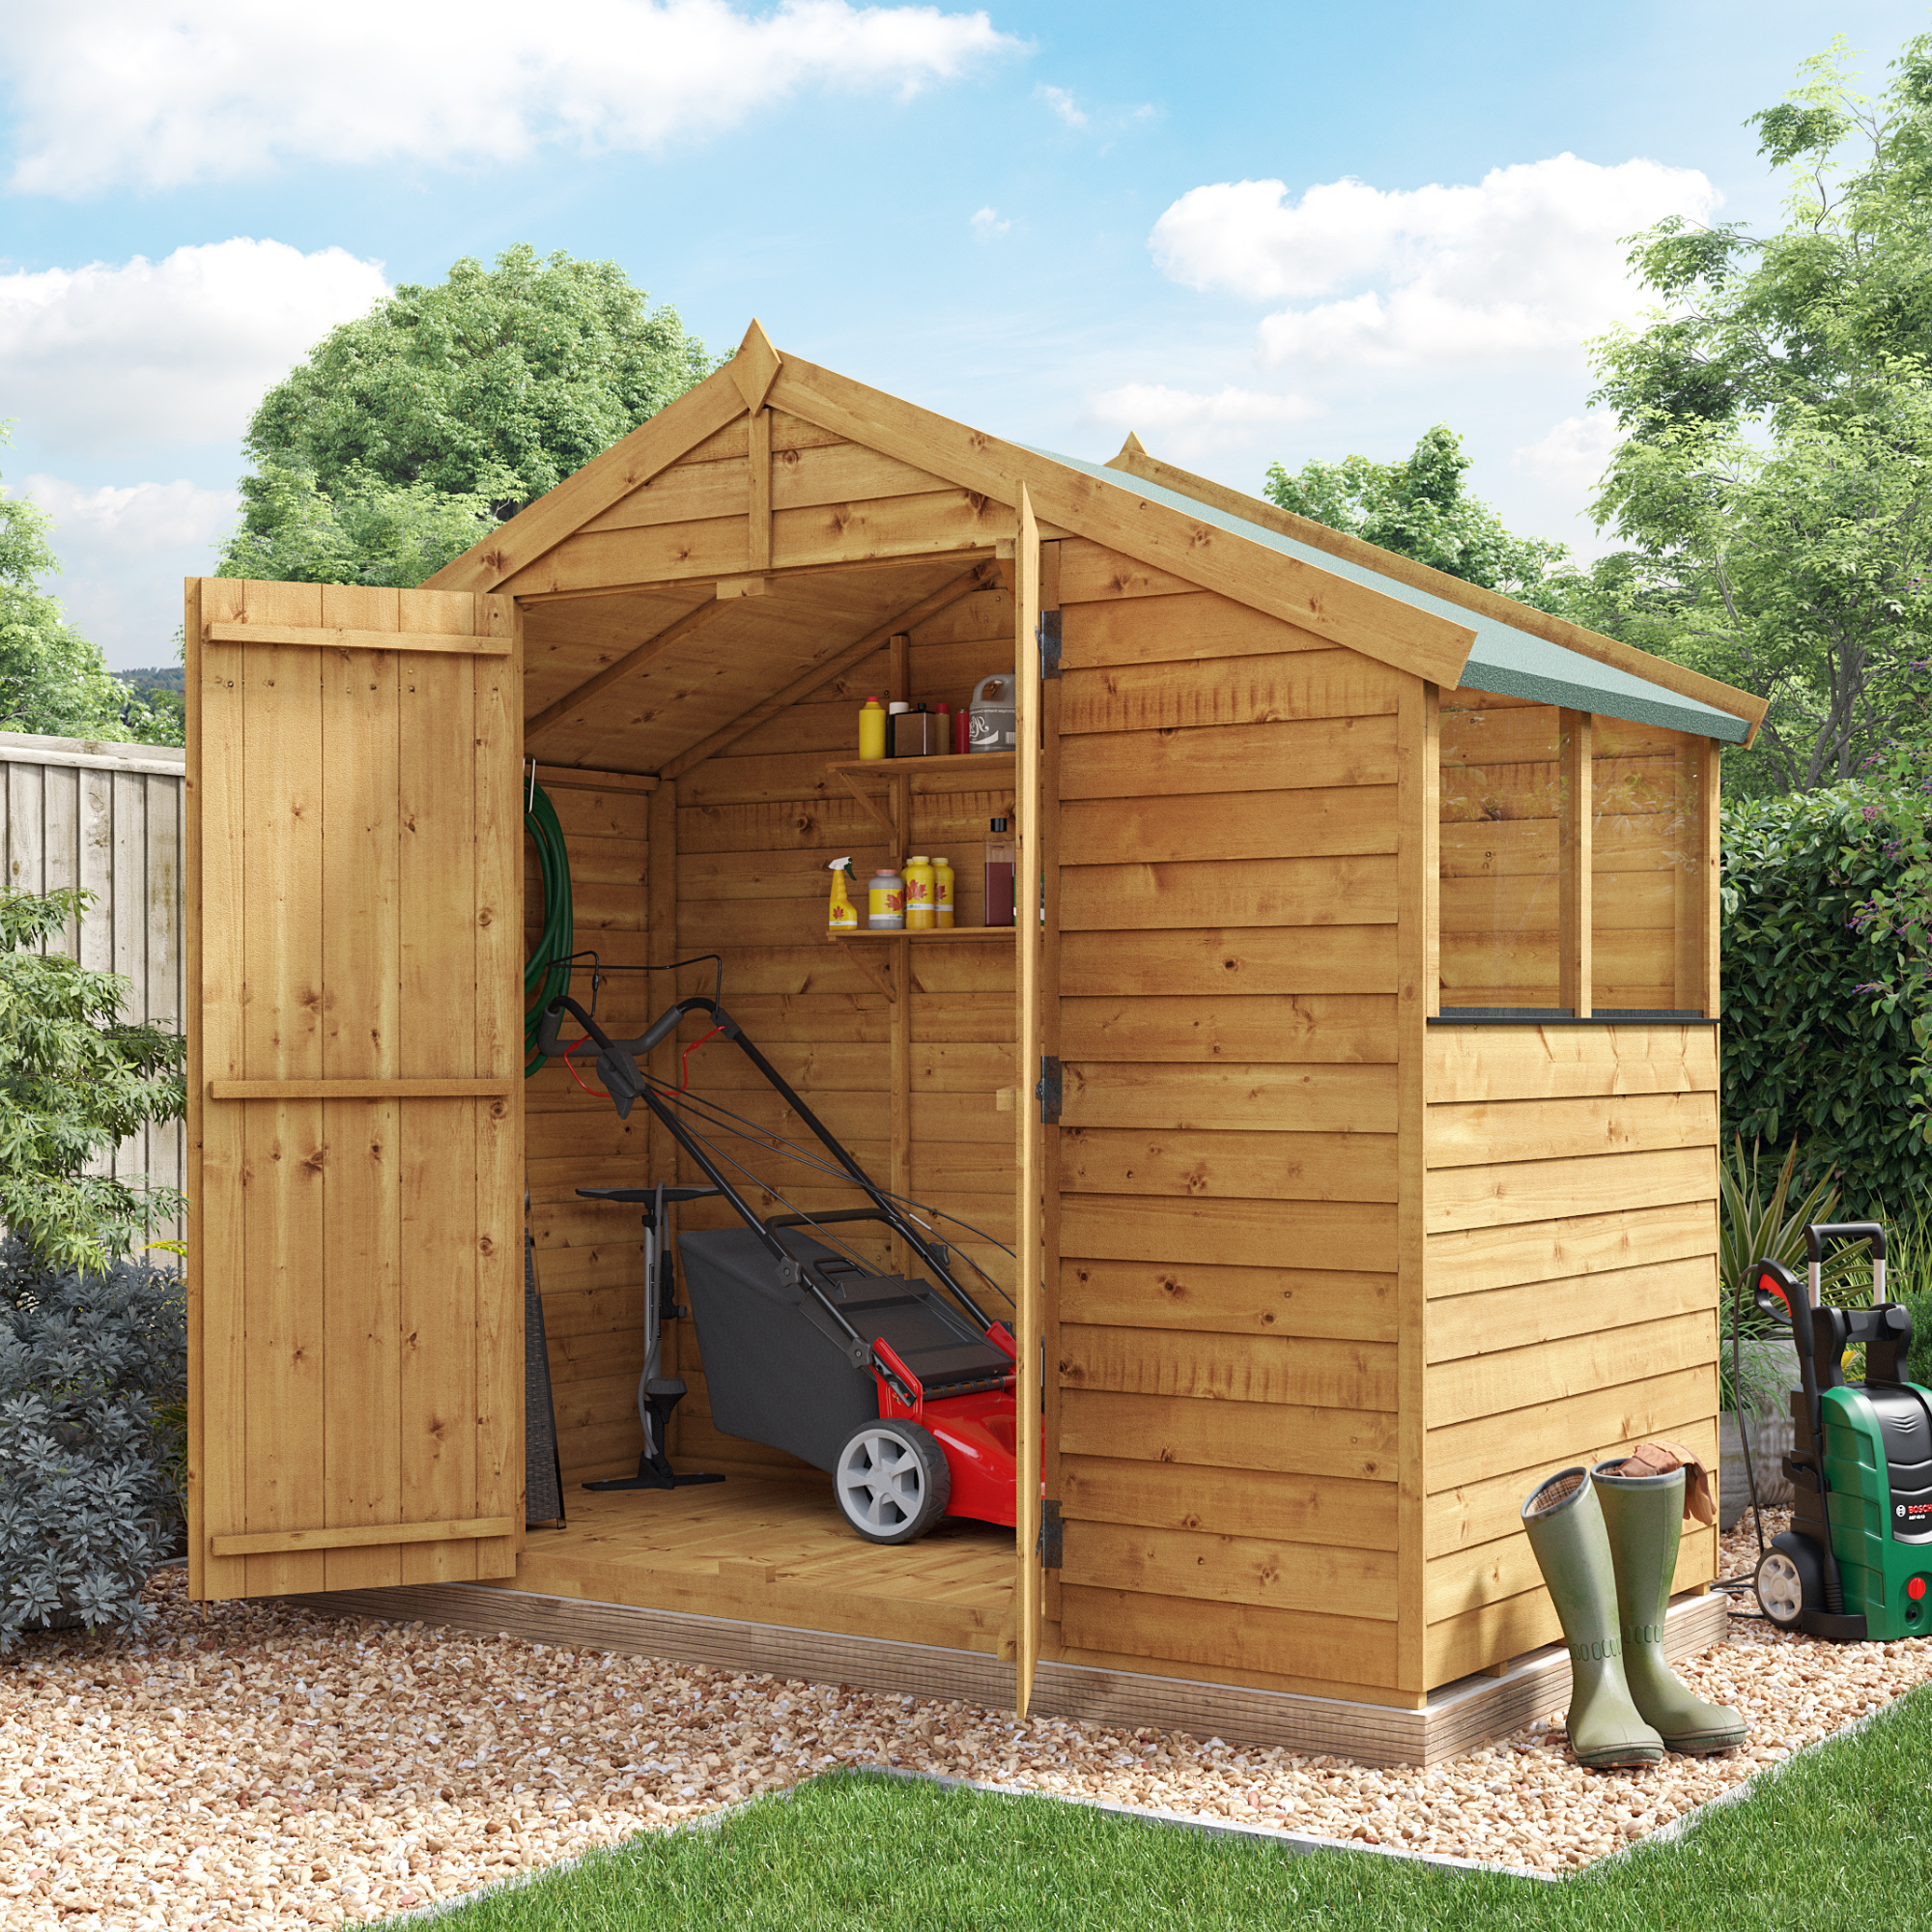 4 x 8 Shed - BillyOh Keeper Overlap Apex Wooden Shed - Windowed 4x8 Garden Shed